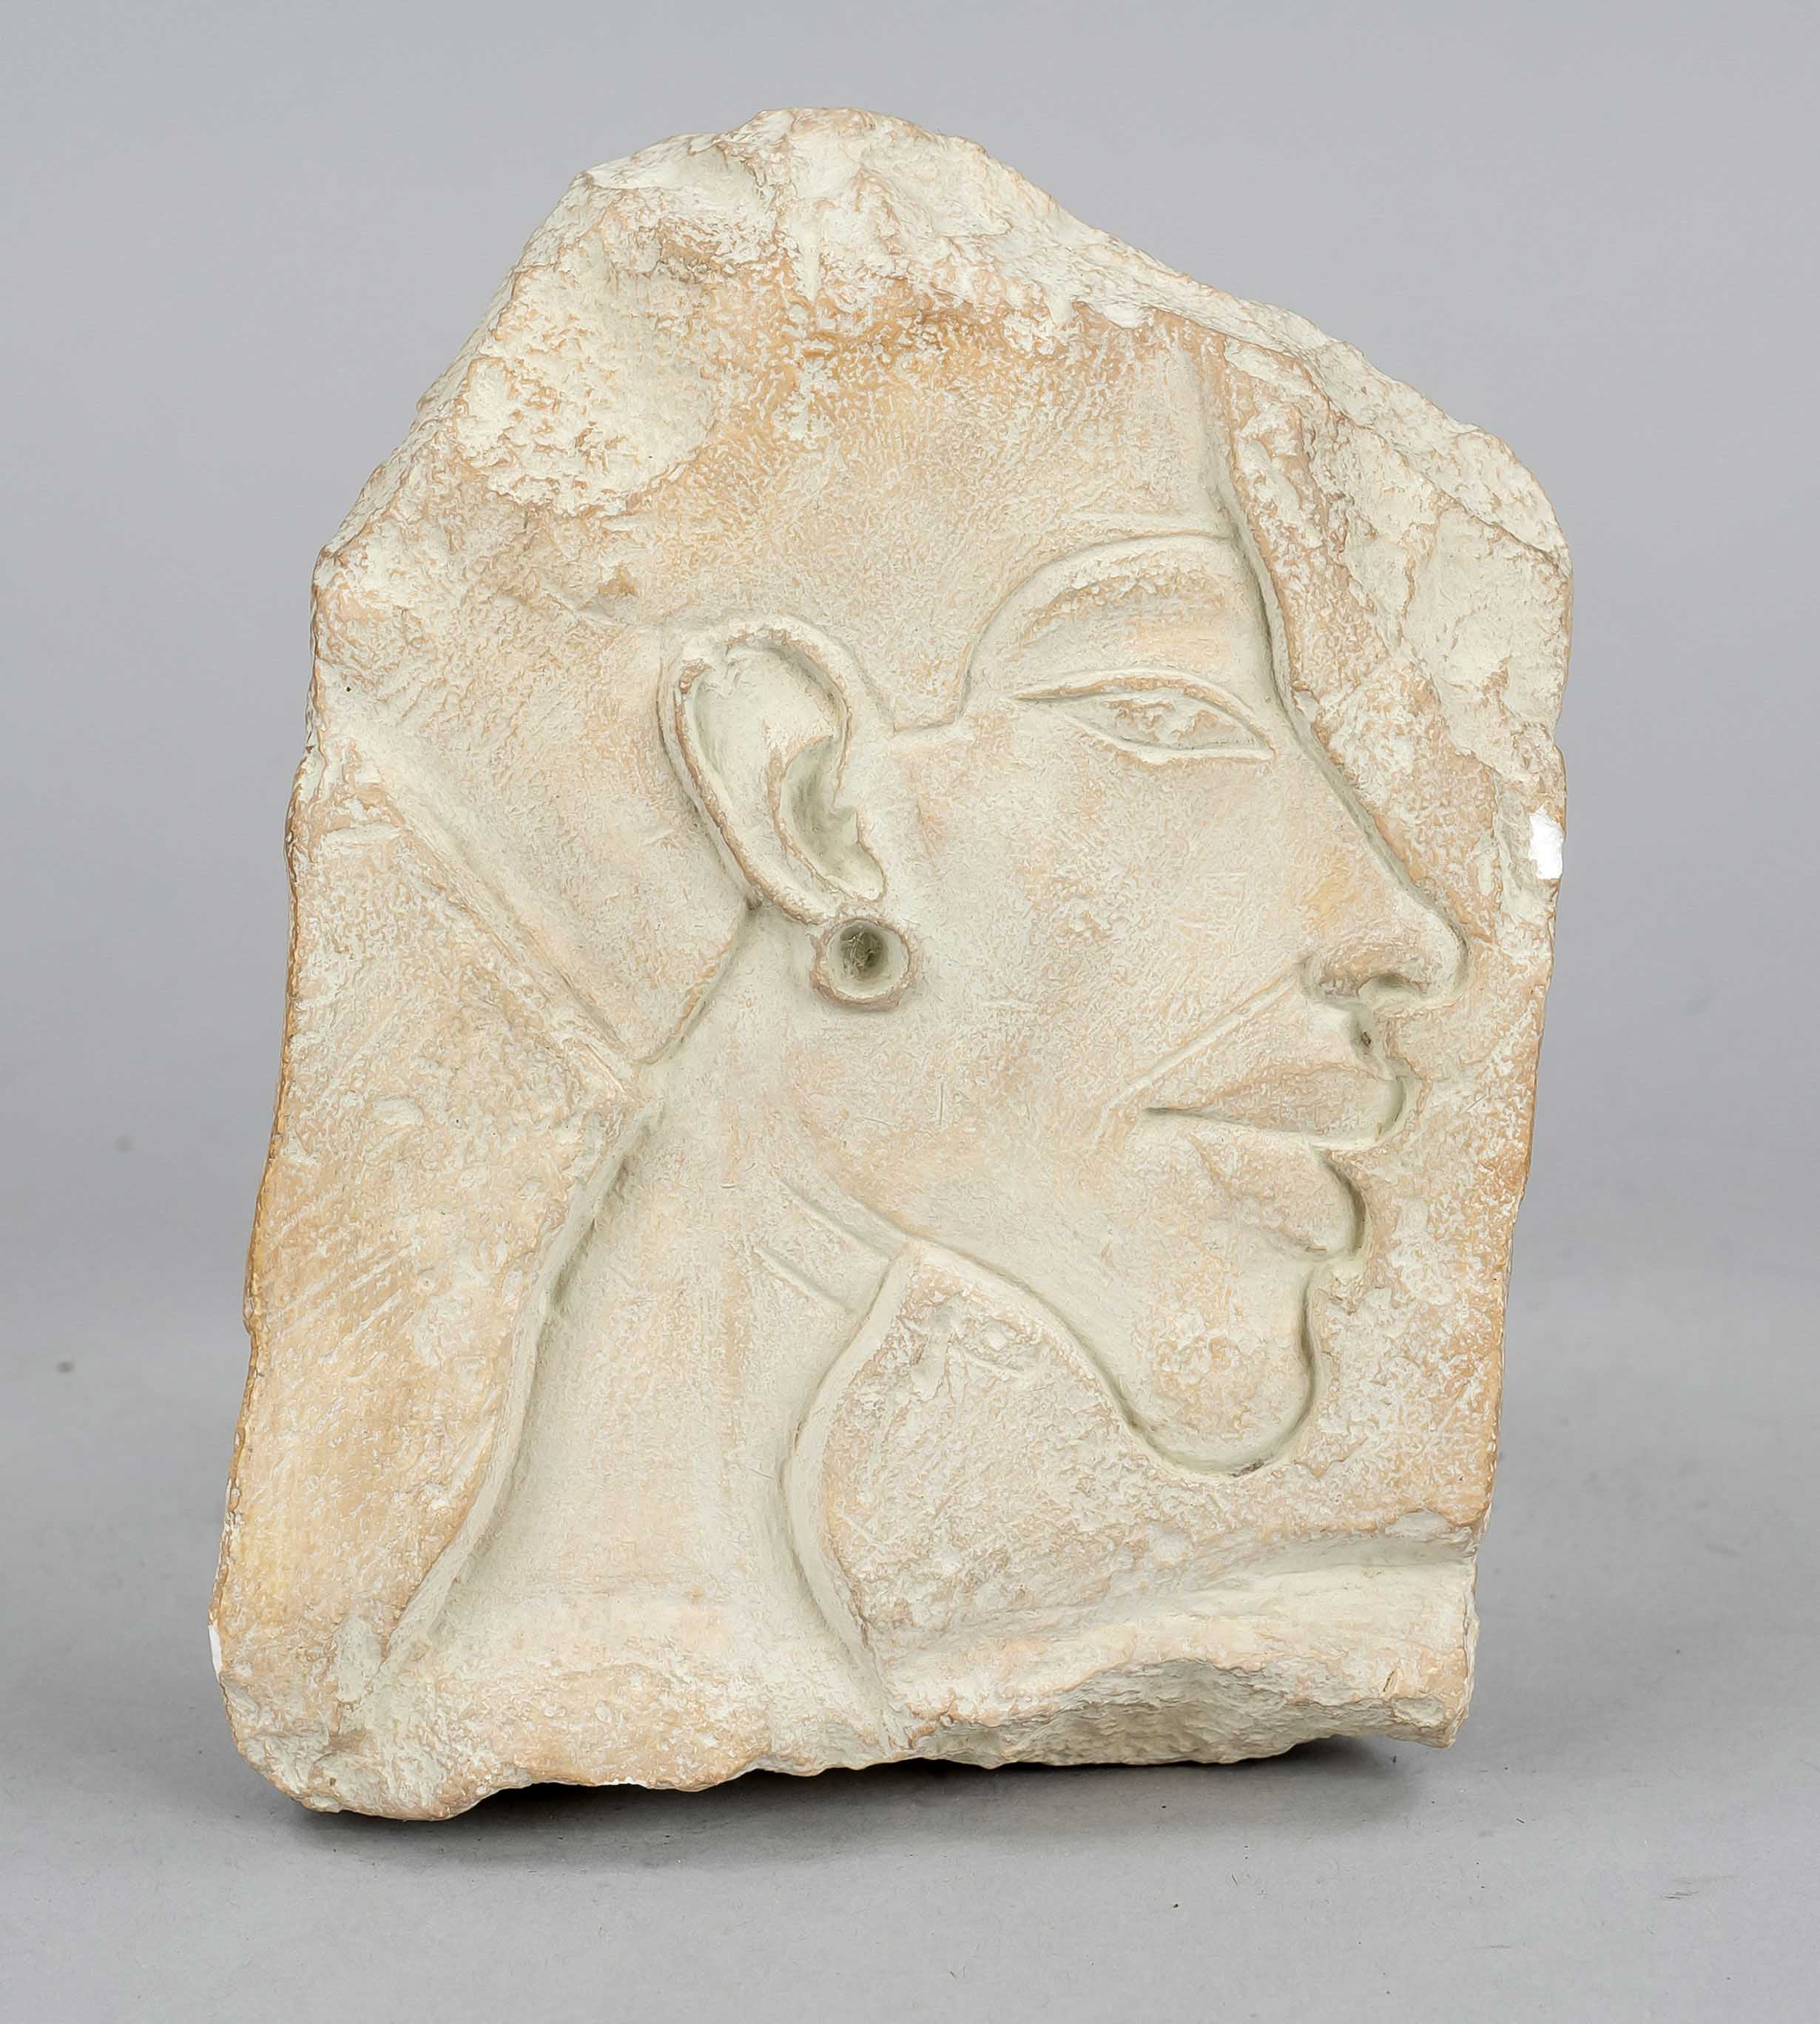 Relief fragment with head of Pharaoh Akhenaten, 2nd half of 20th century, museum replica of the